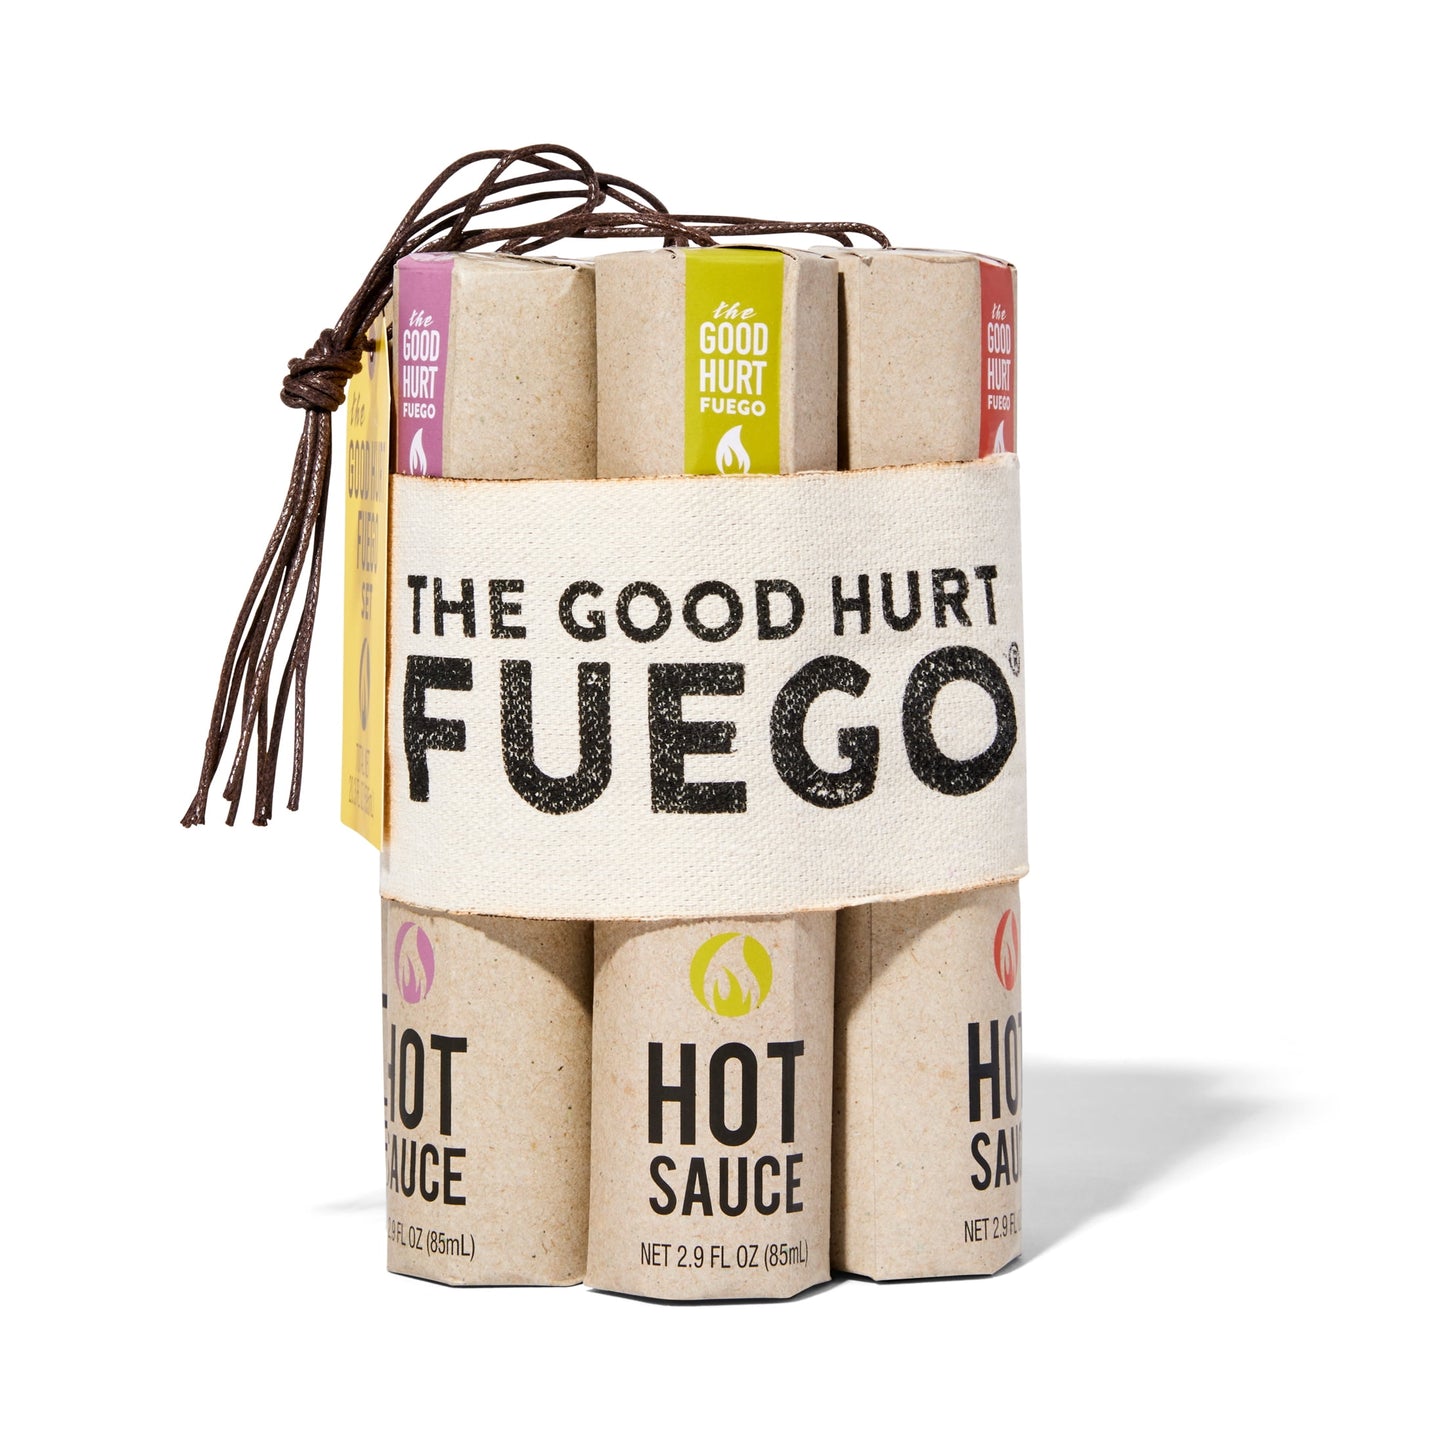 The Good Hurt Fuego: a Hot Sauce Gift Set for Hot Sauce Lover’S, Set of 7